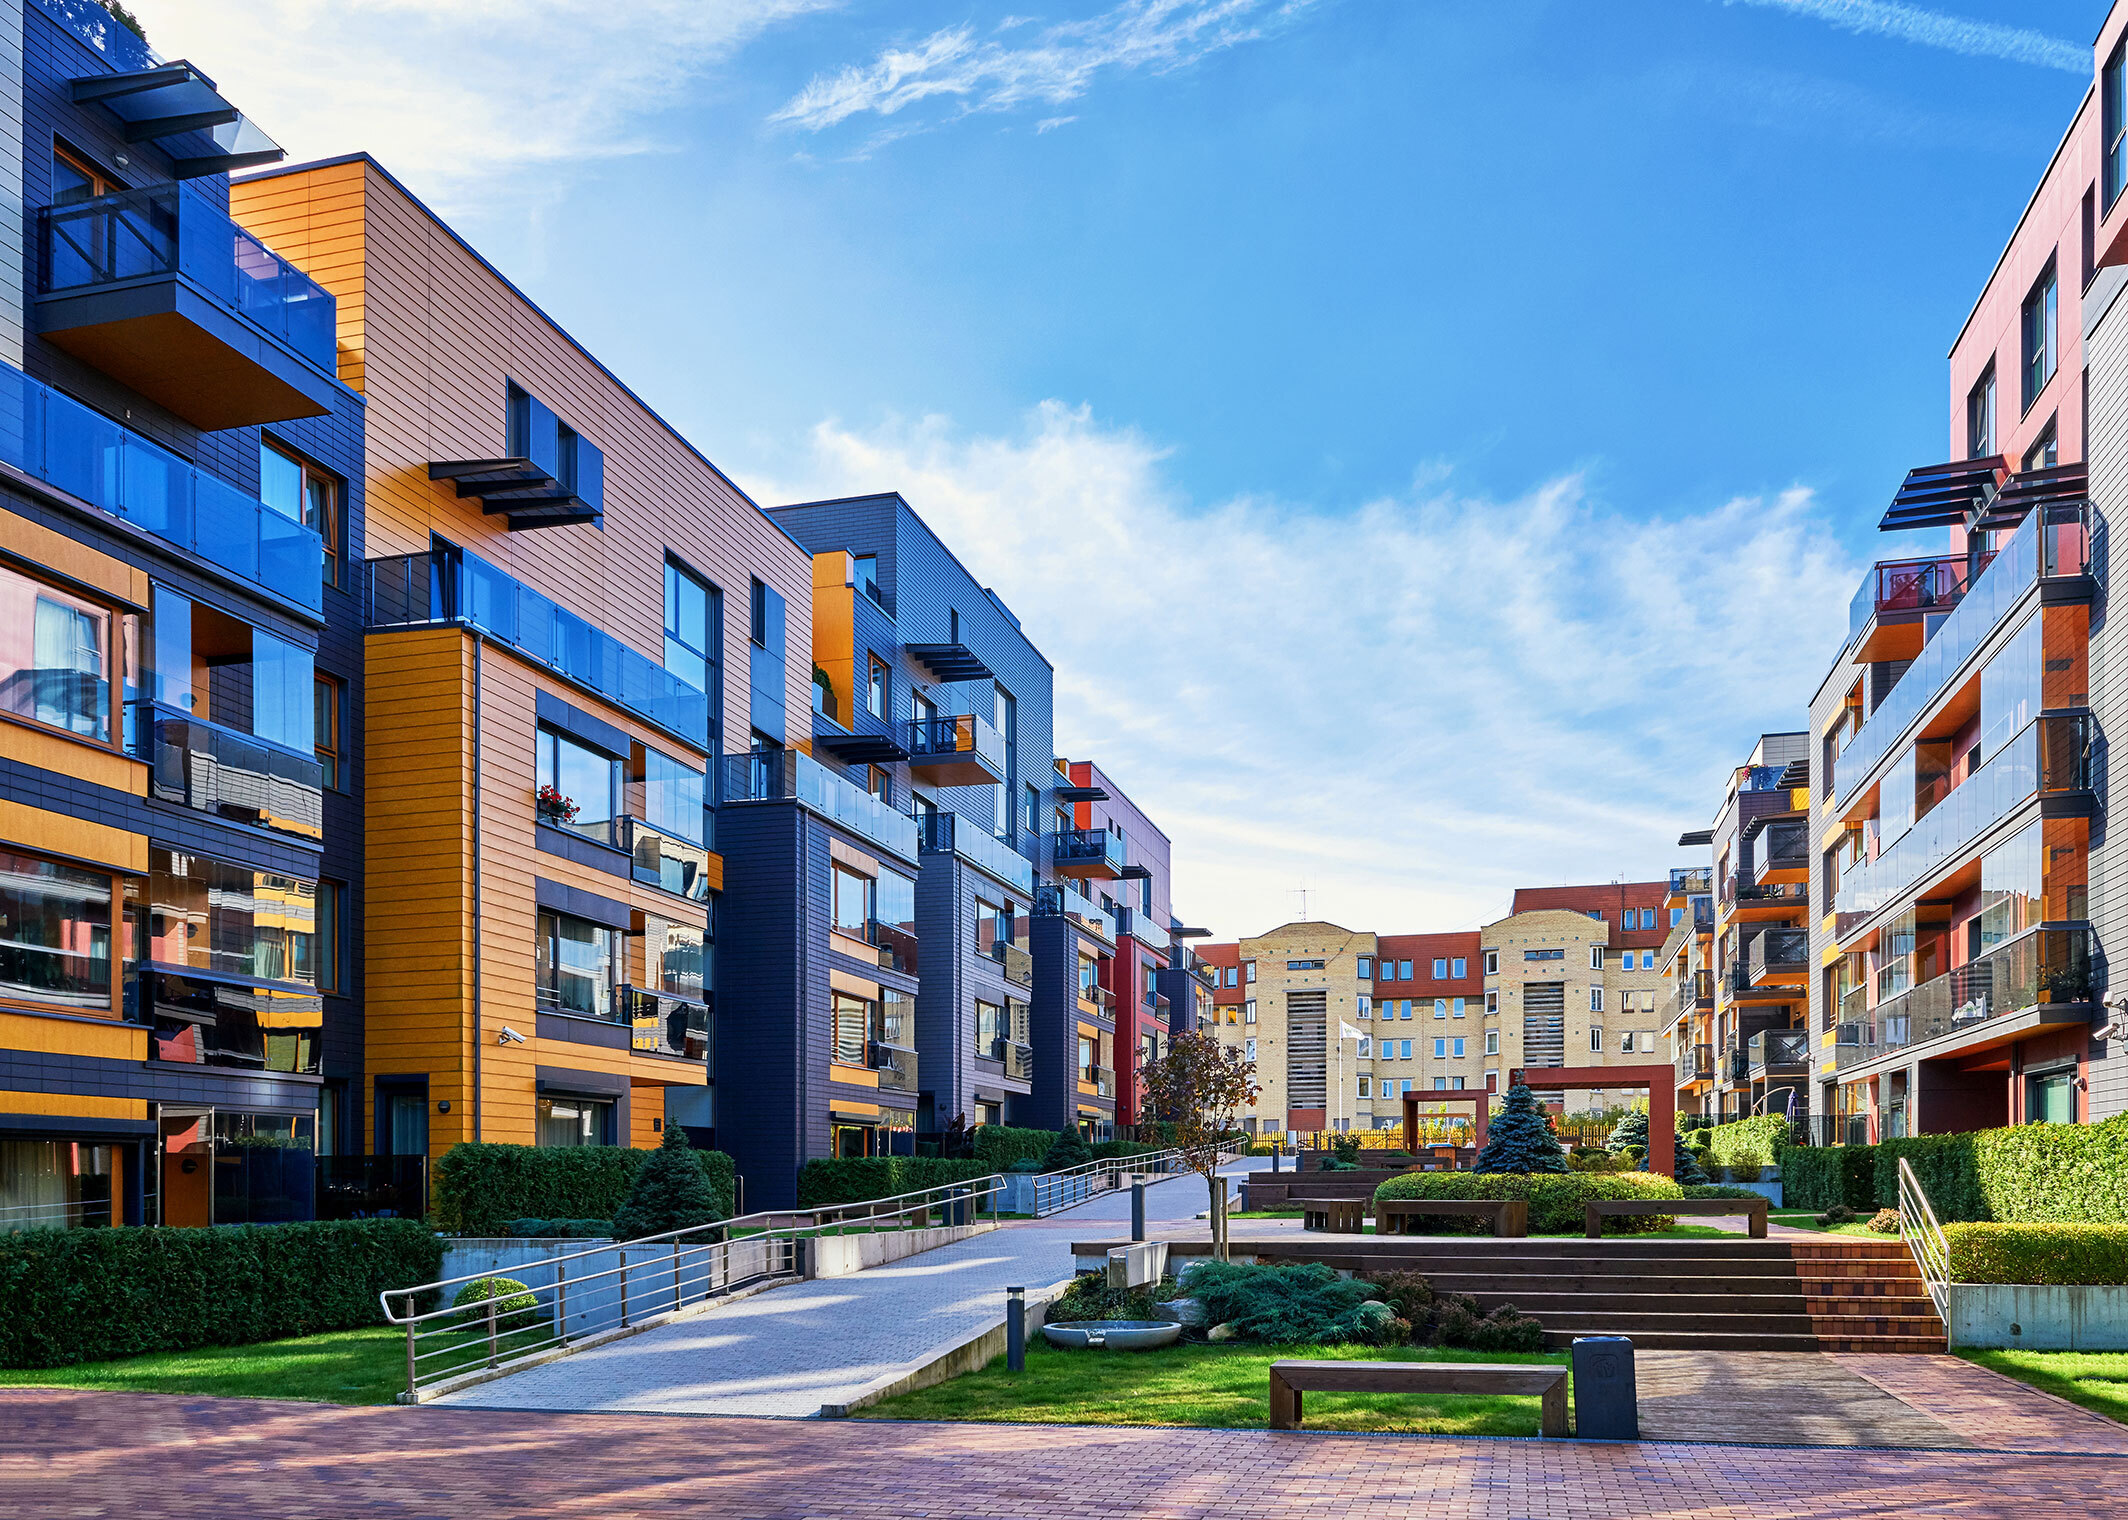 How to Succeed with Smart Technology Platforms in Multifamily